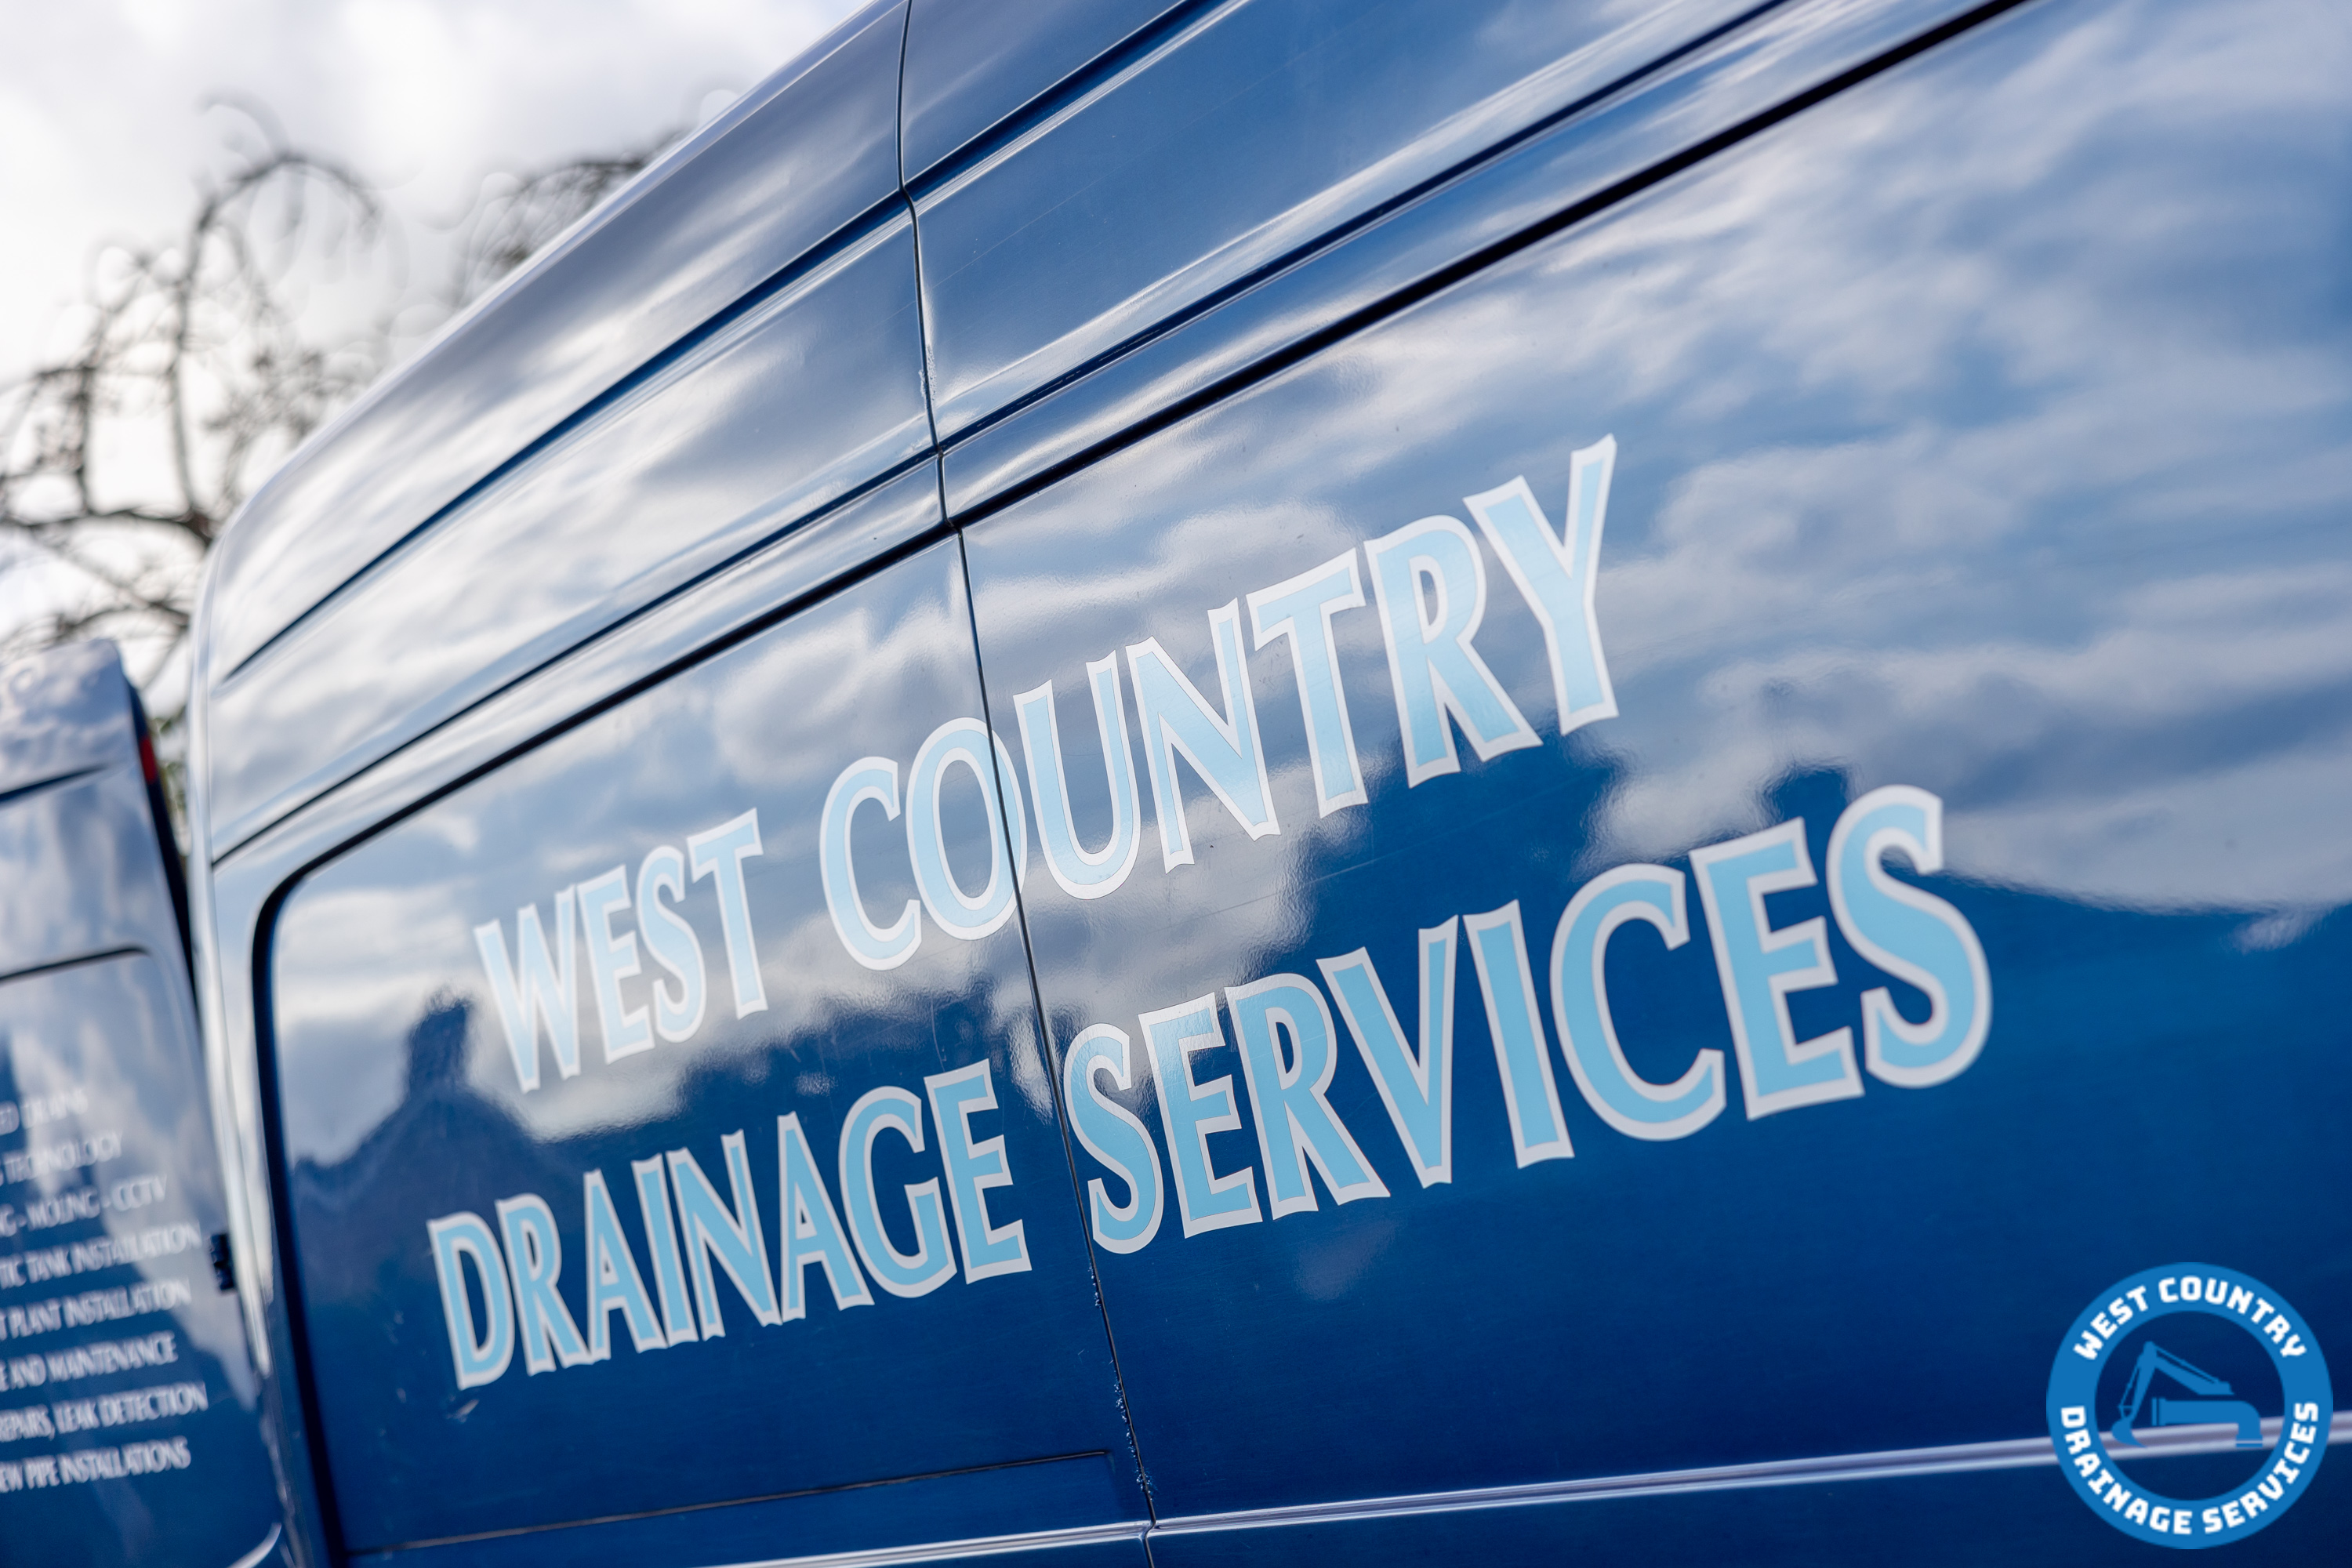 2023_10-06 West Country Drainage Services, Trull - Drainage Liner - Web Resolution logo - IMPACT 20twenty-18